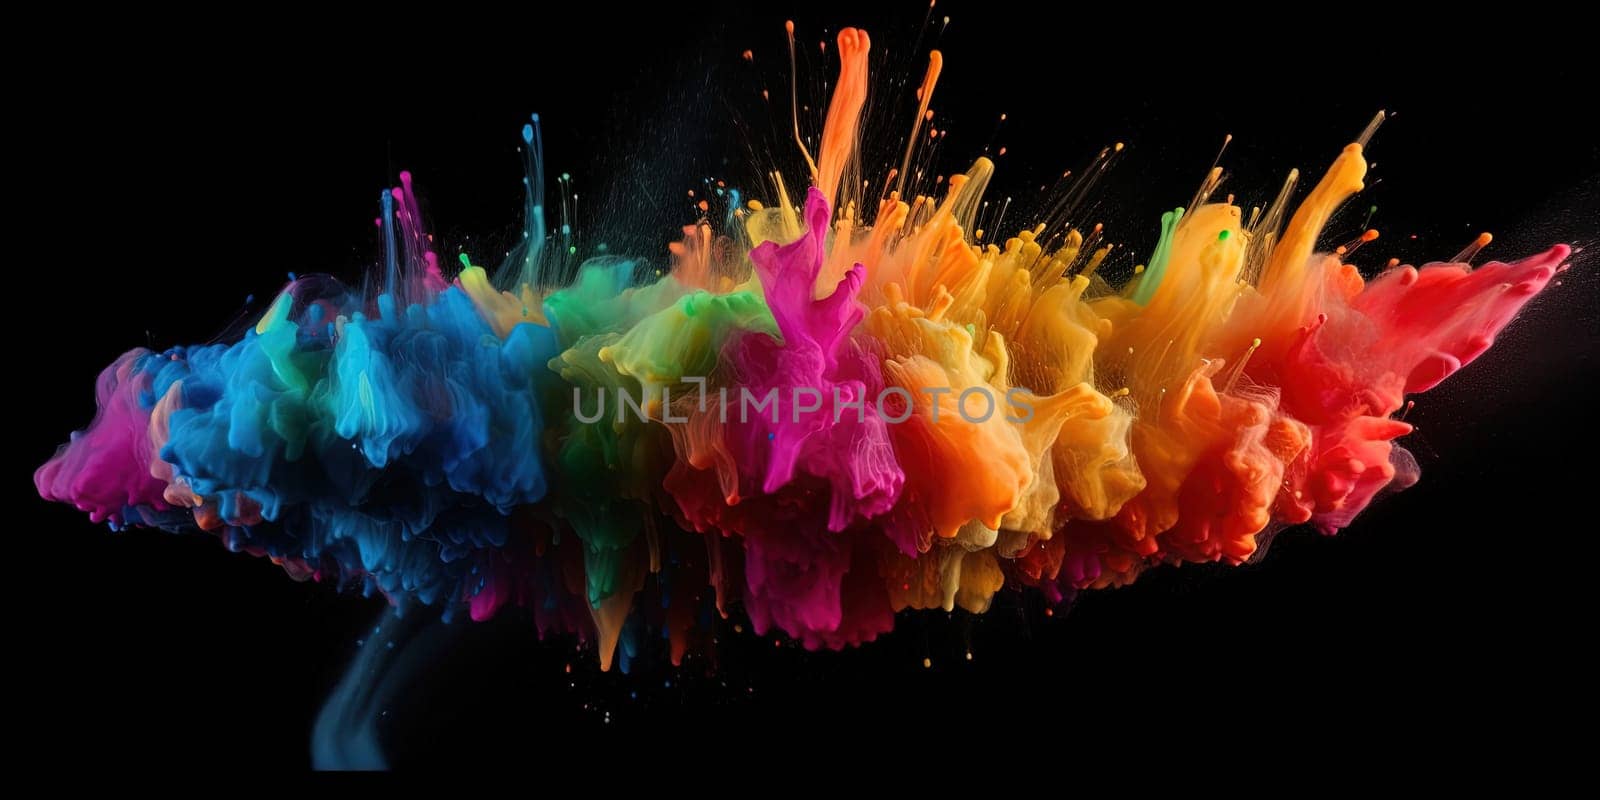 multicolor rainbow Paint blew up, colorful splashes and drops by tan4ikk1